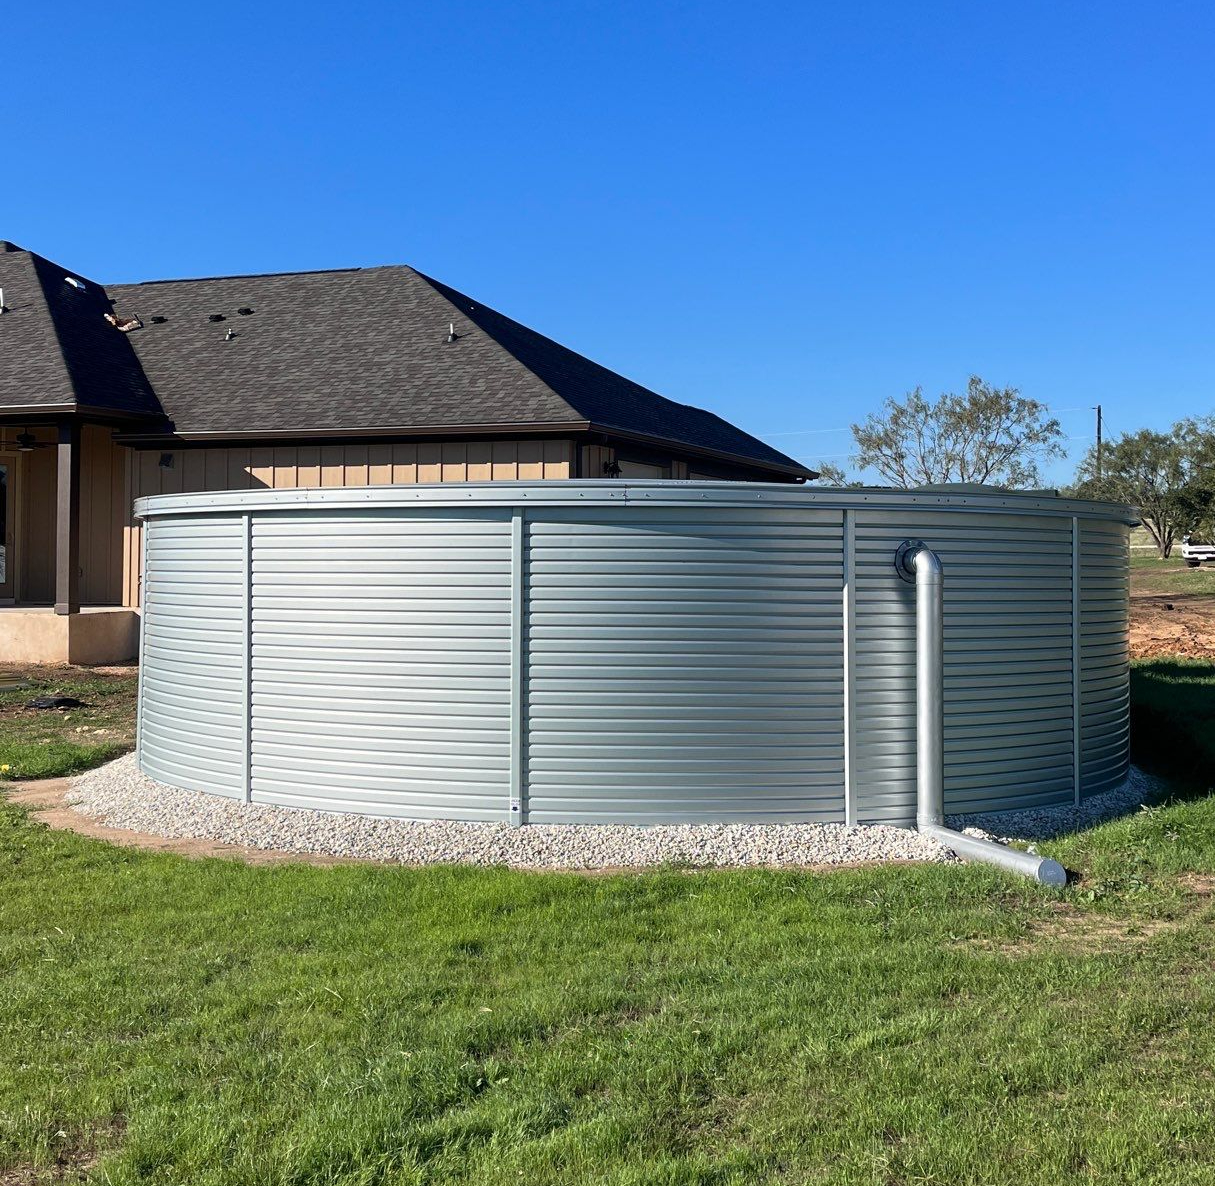 Rainwater Collection System Project in Sandy Point